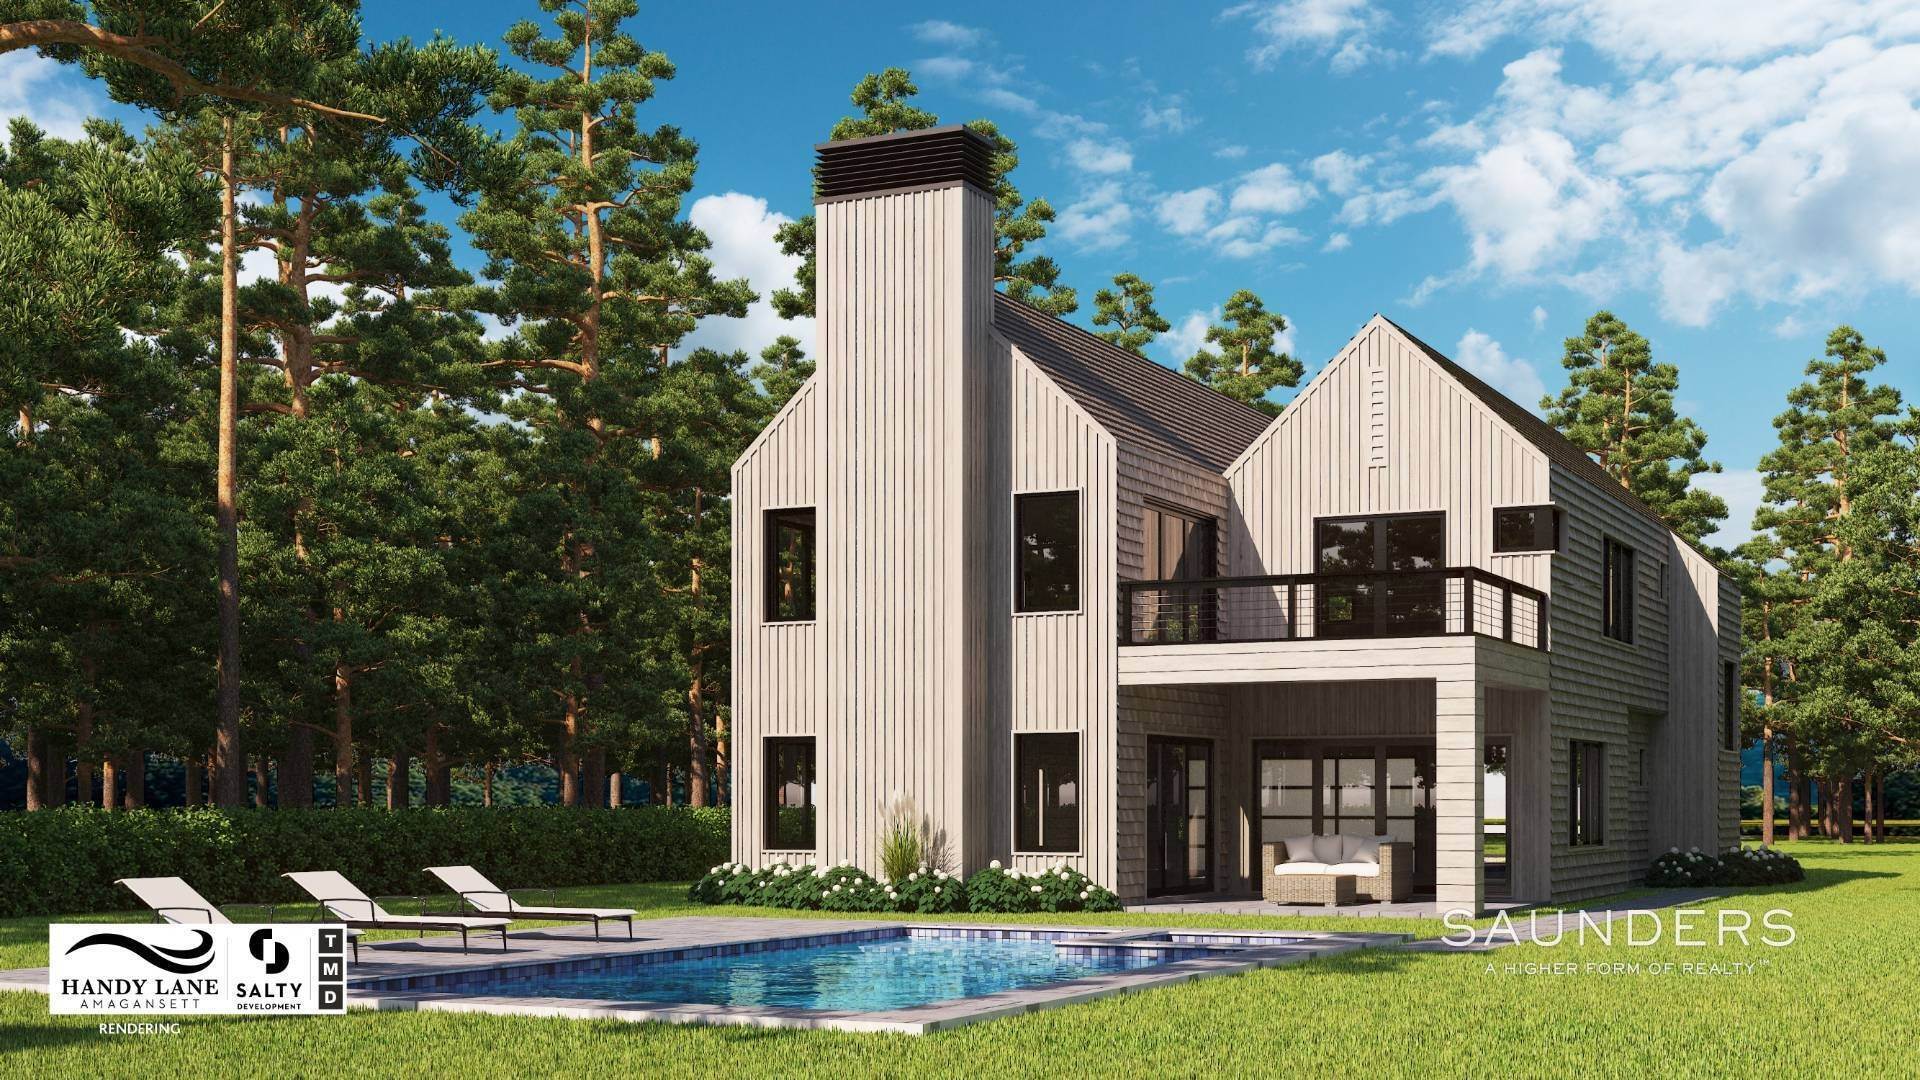 2. Single Family Homes for Sale at Amagansett South Of The Highway-New Construction 24 Handy Lane, Amagansett, NY 11930